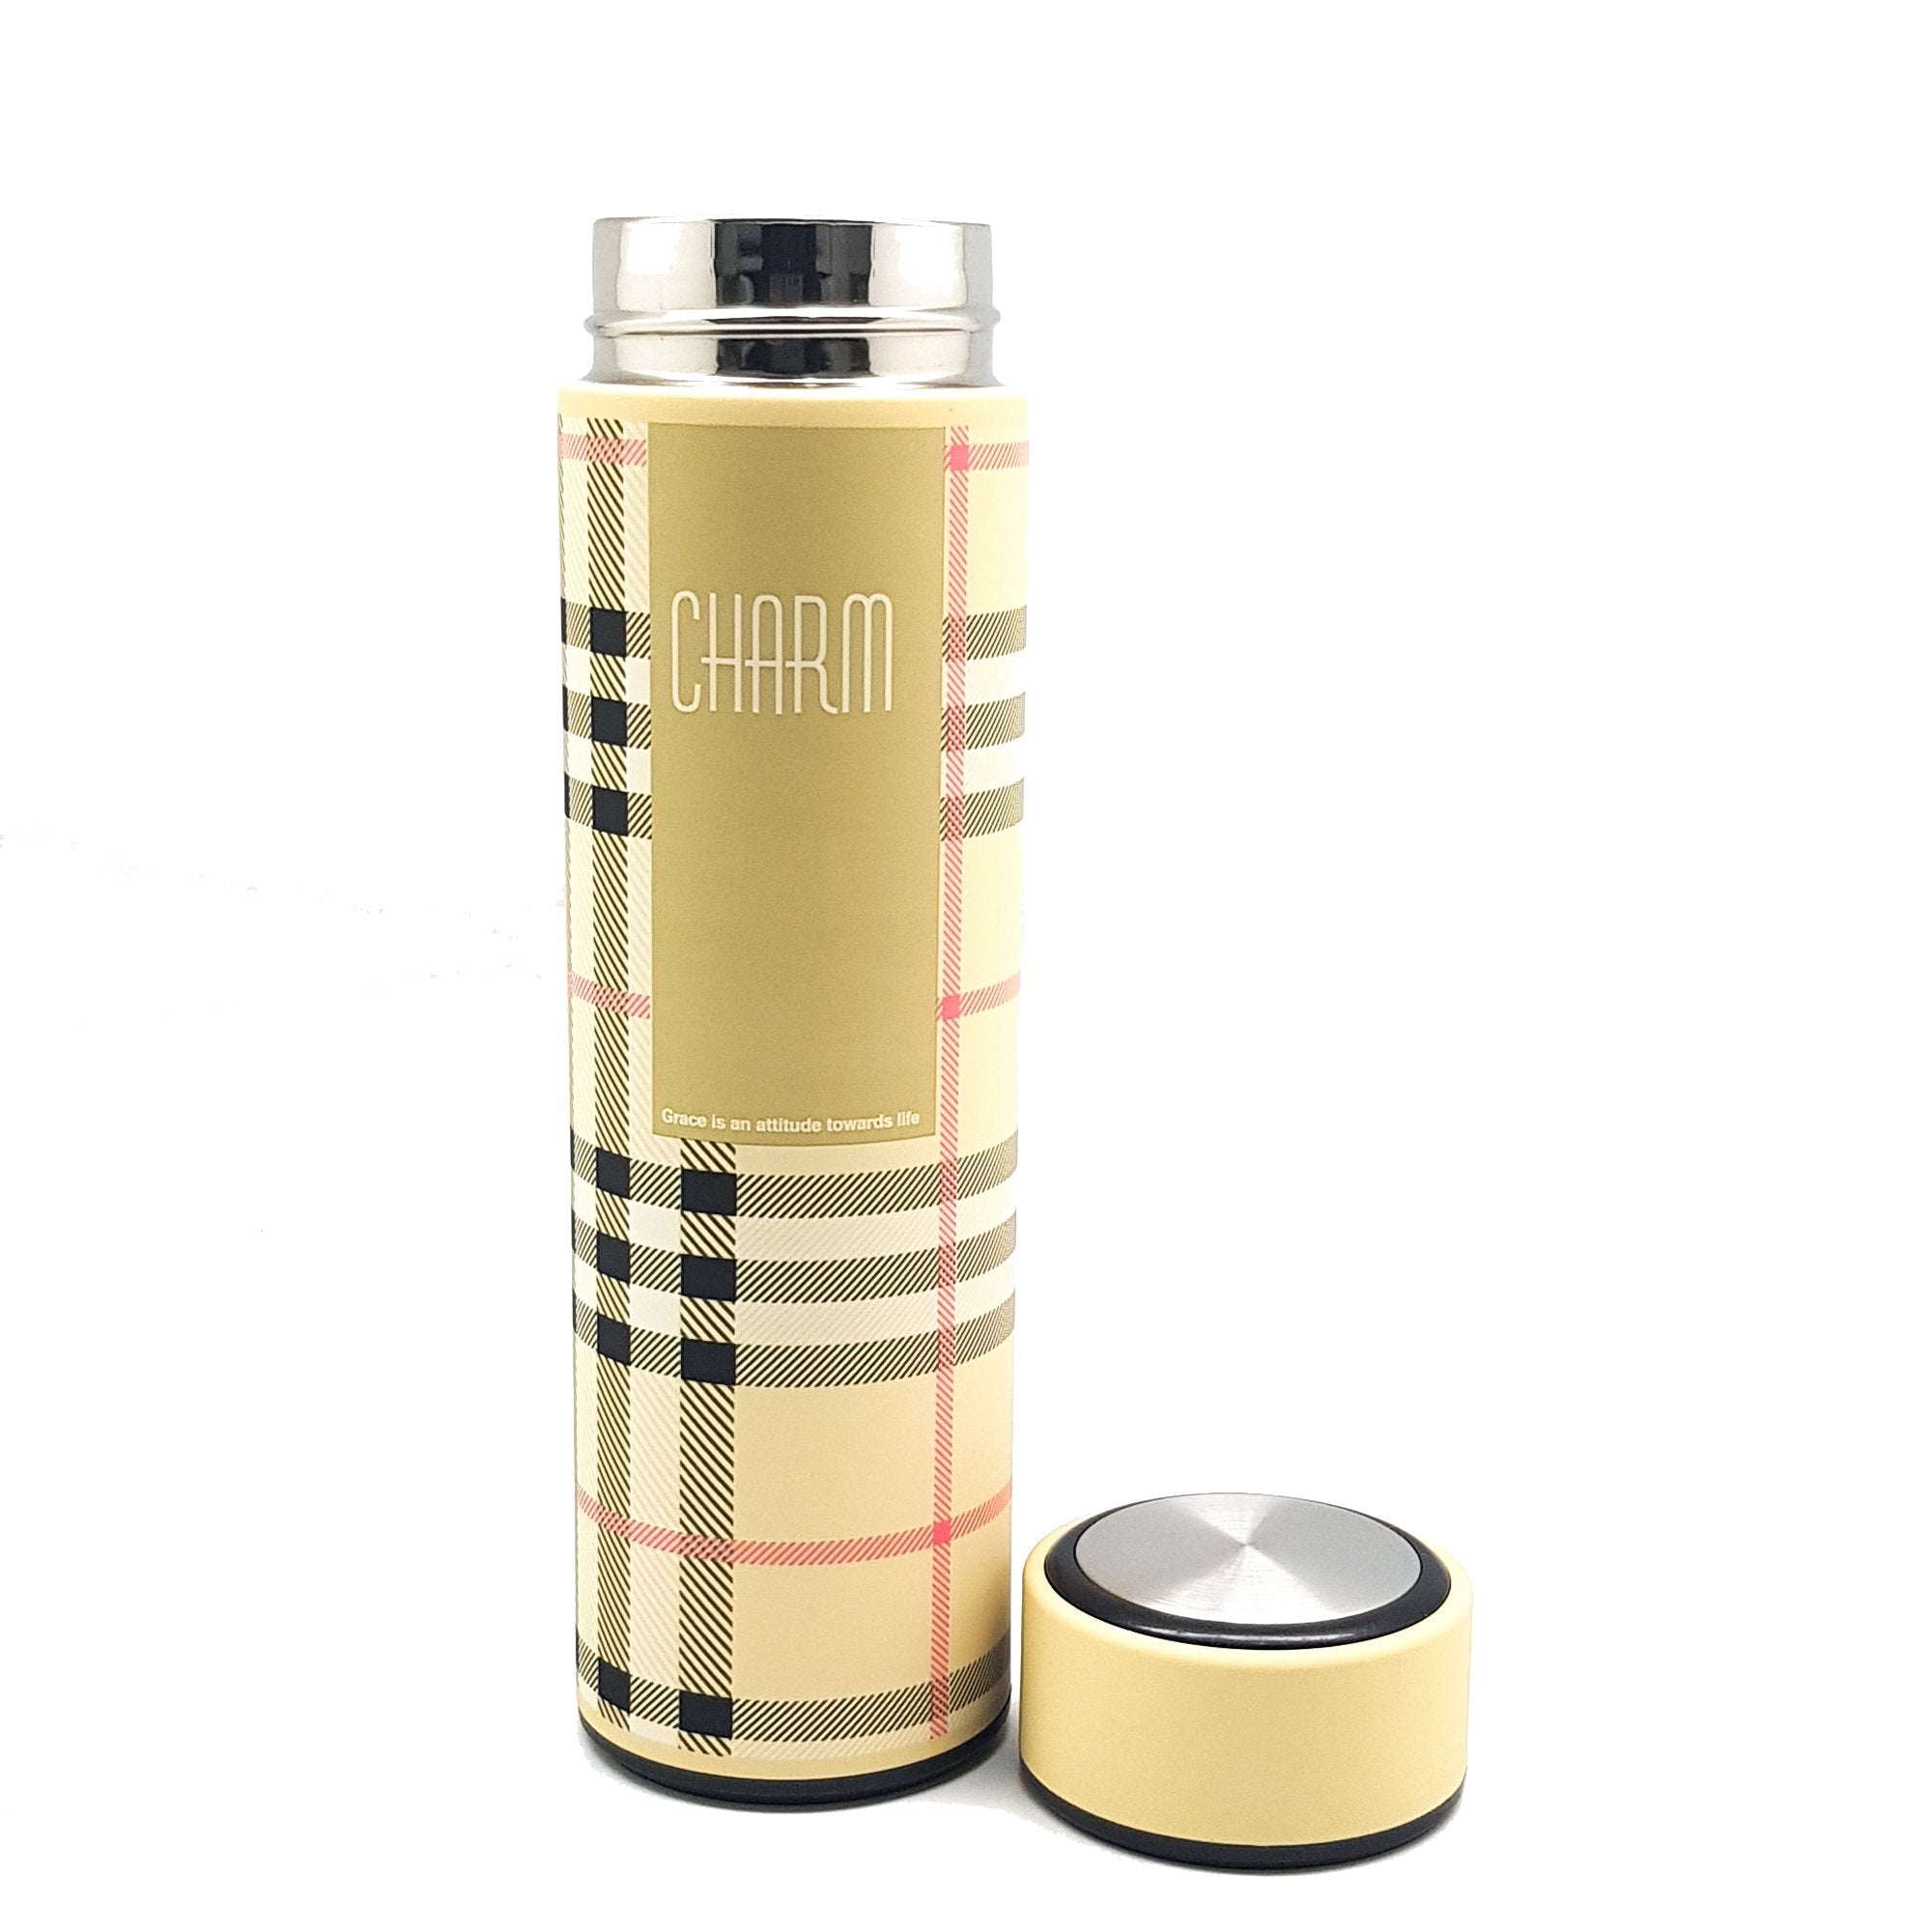 Stainless Steel Vacuum Insulated Water Bottle | Leak-Proof Double Walled Bottle Capacity of 480 ML